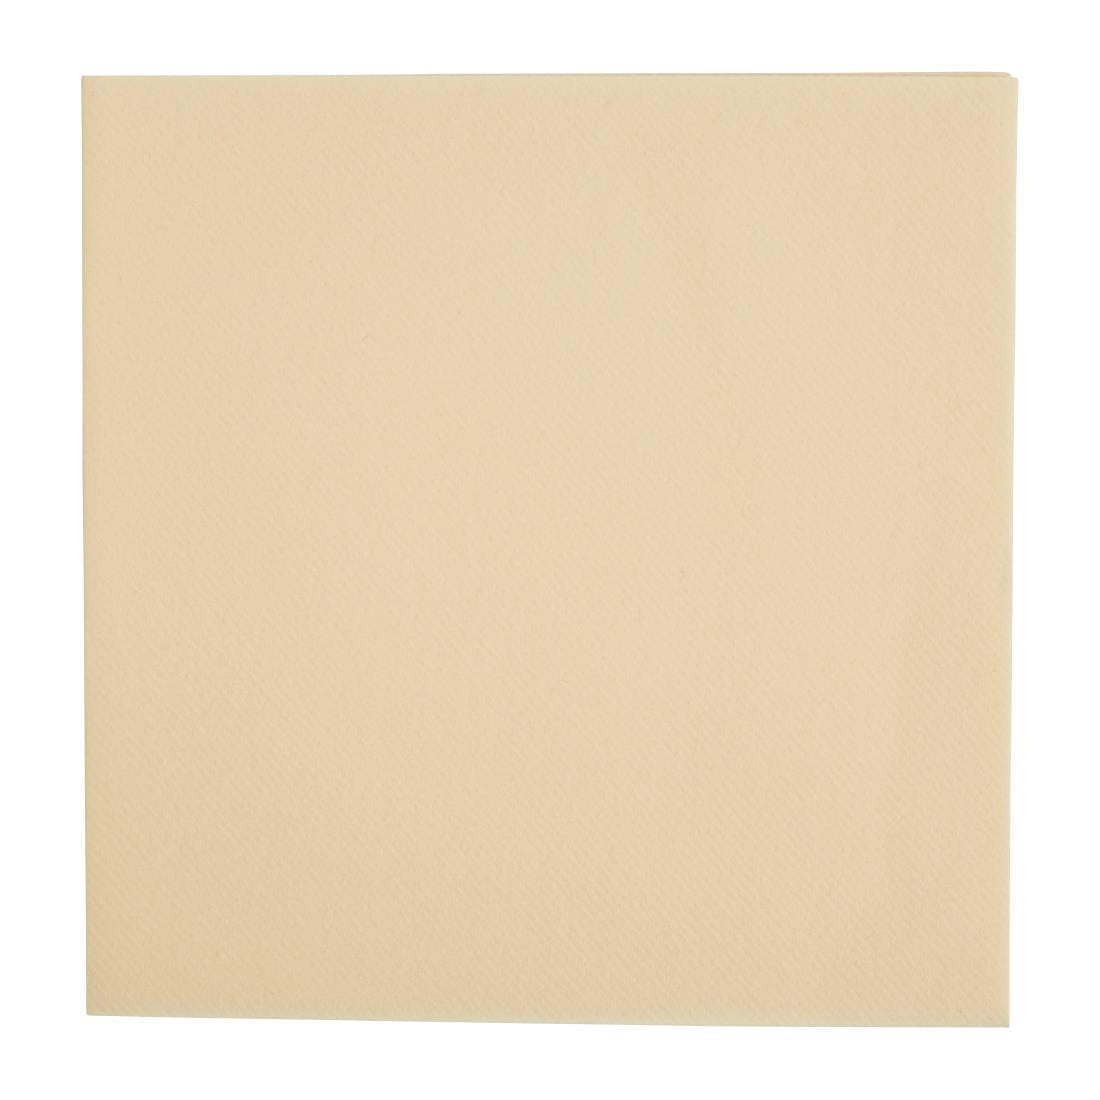 FE265 Fiesta Recyclable Premium Tablin Dinner Napkin Cream 40x40cm Airlaid 1/4 Fold (Pack of 500) JD Catering Equipment Solutions Ltd